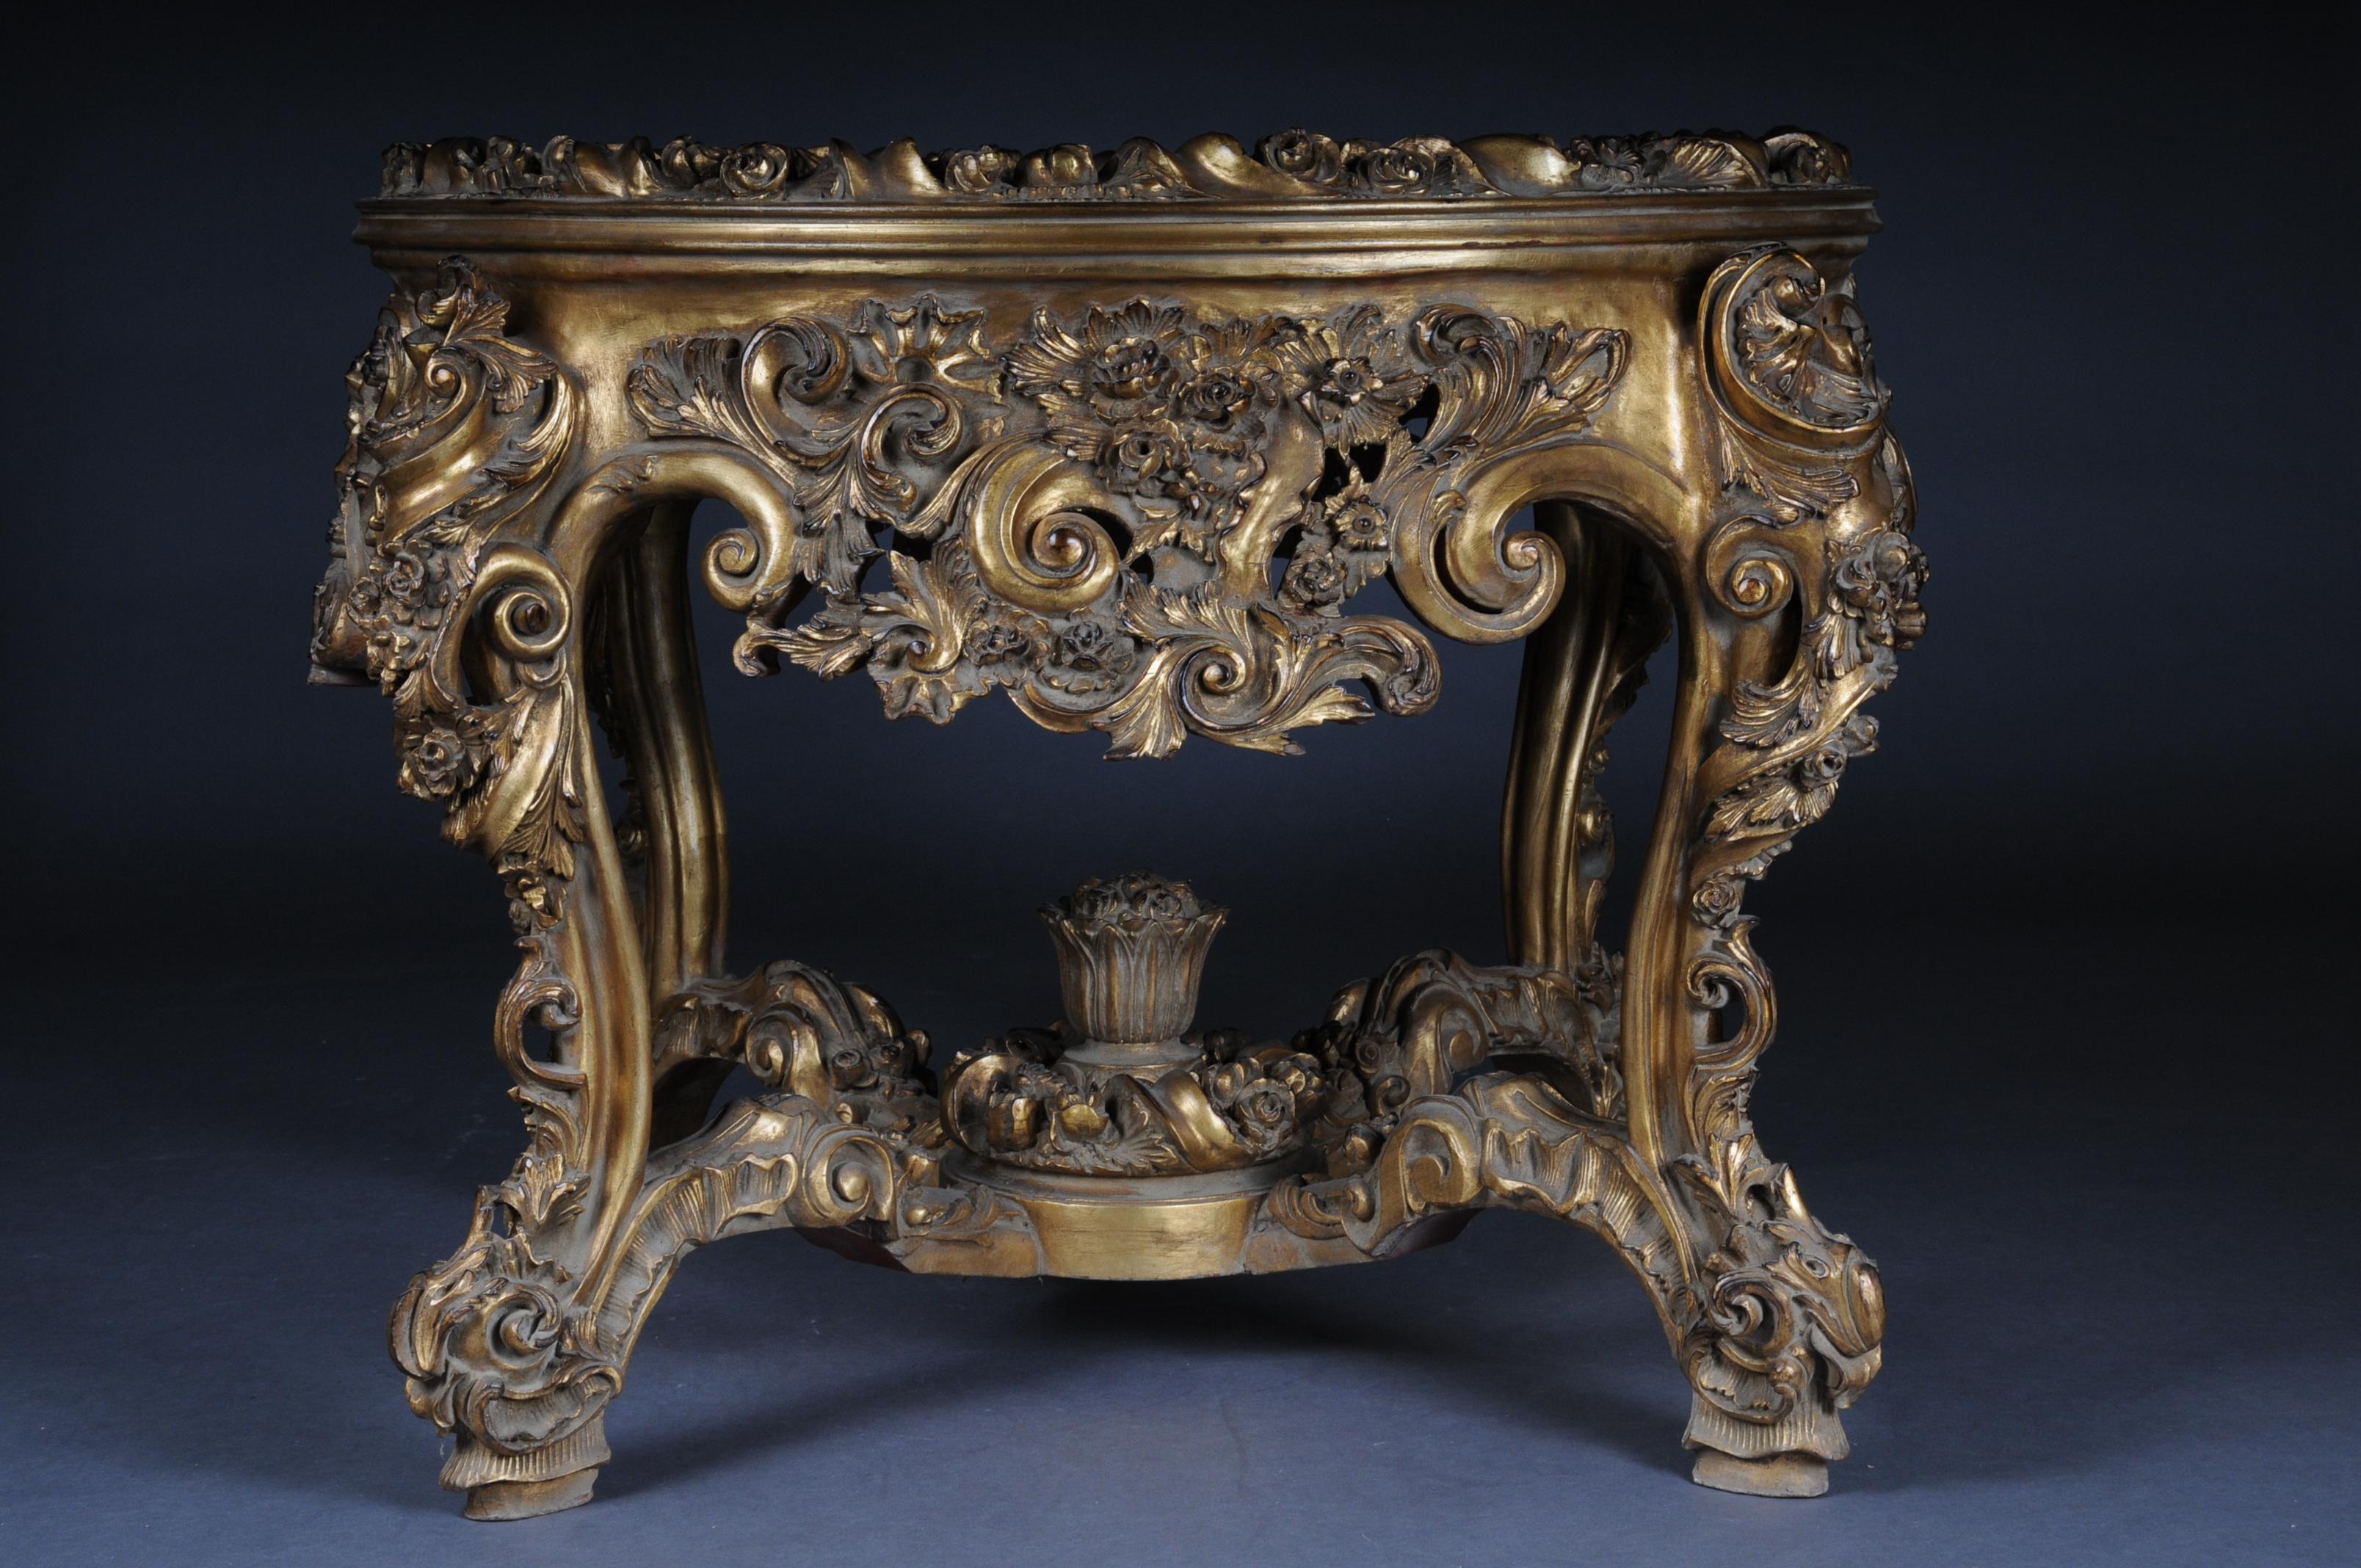 High quality solid beechwood finely carved down to the last detail. Gold taken. On curved, carved legs, connected with X-shaped, heavily carved gutter. Ornamented frame with garlands. Overhanging, profiled, round tabletop. On the cover plate, a